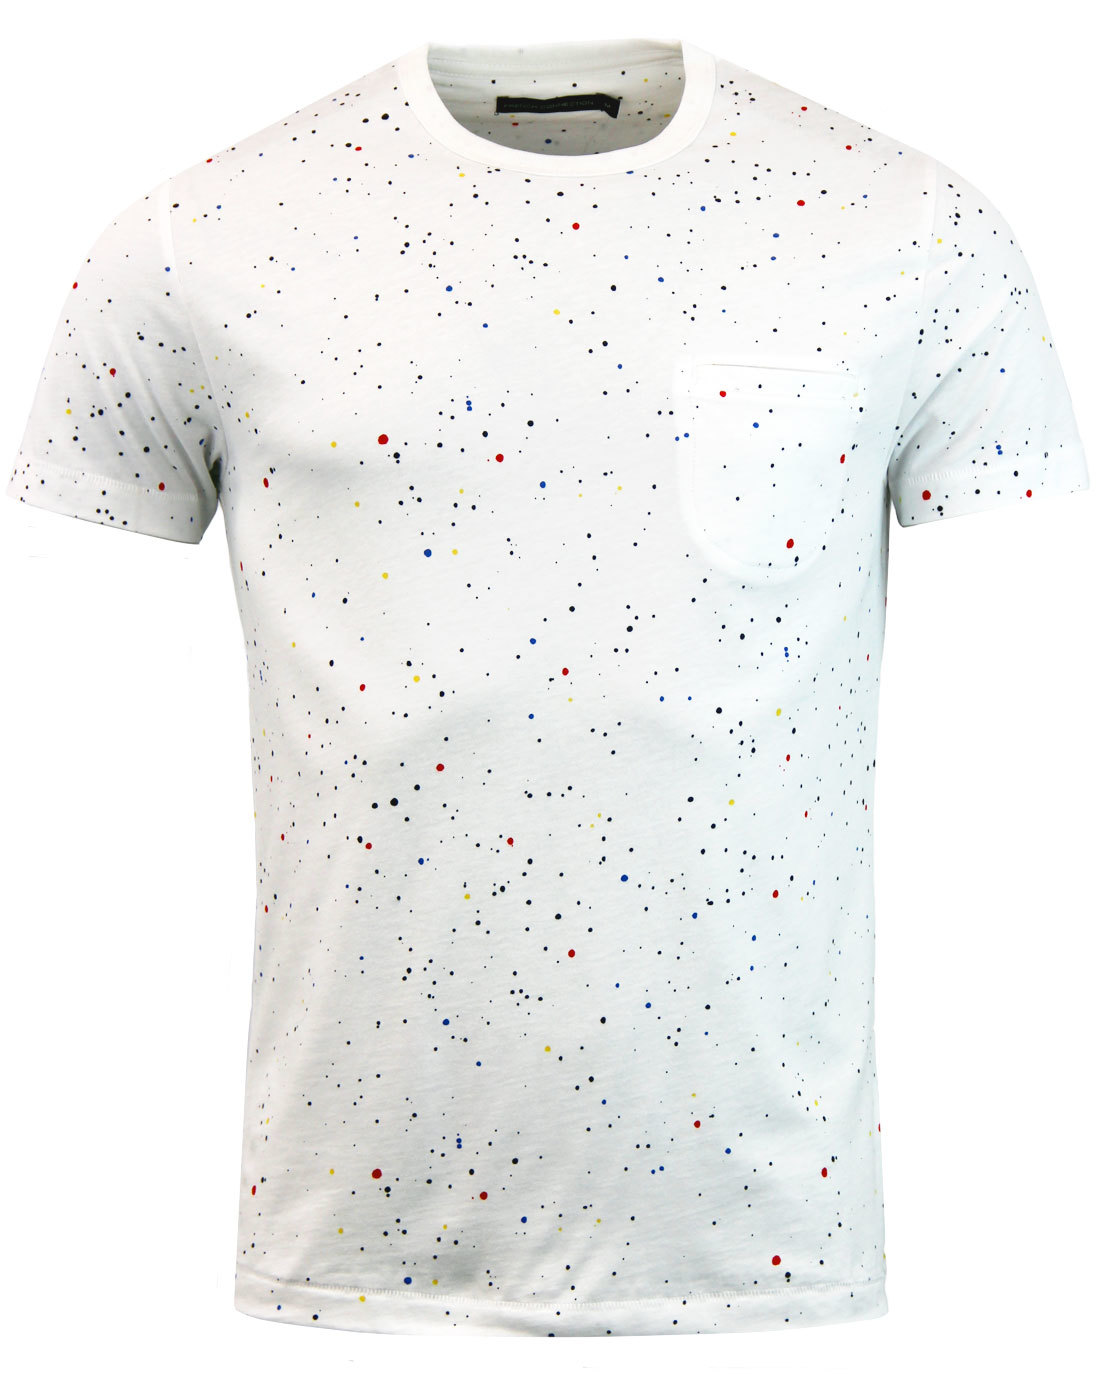 FRENCH CONNECTION Star Splatter Retro Paint Print Tee in White